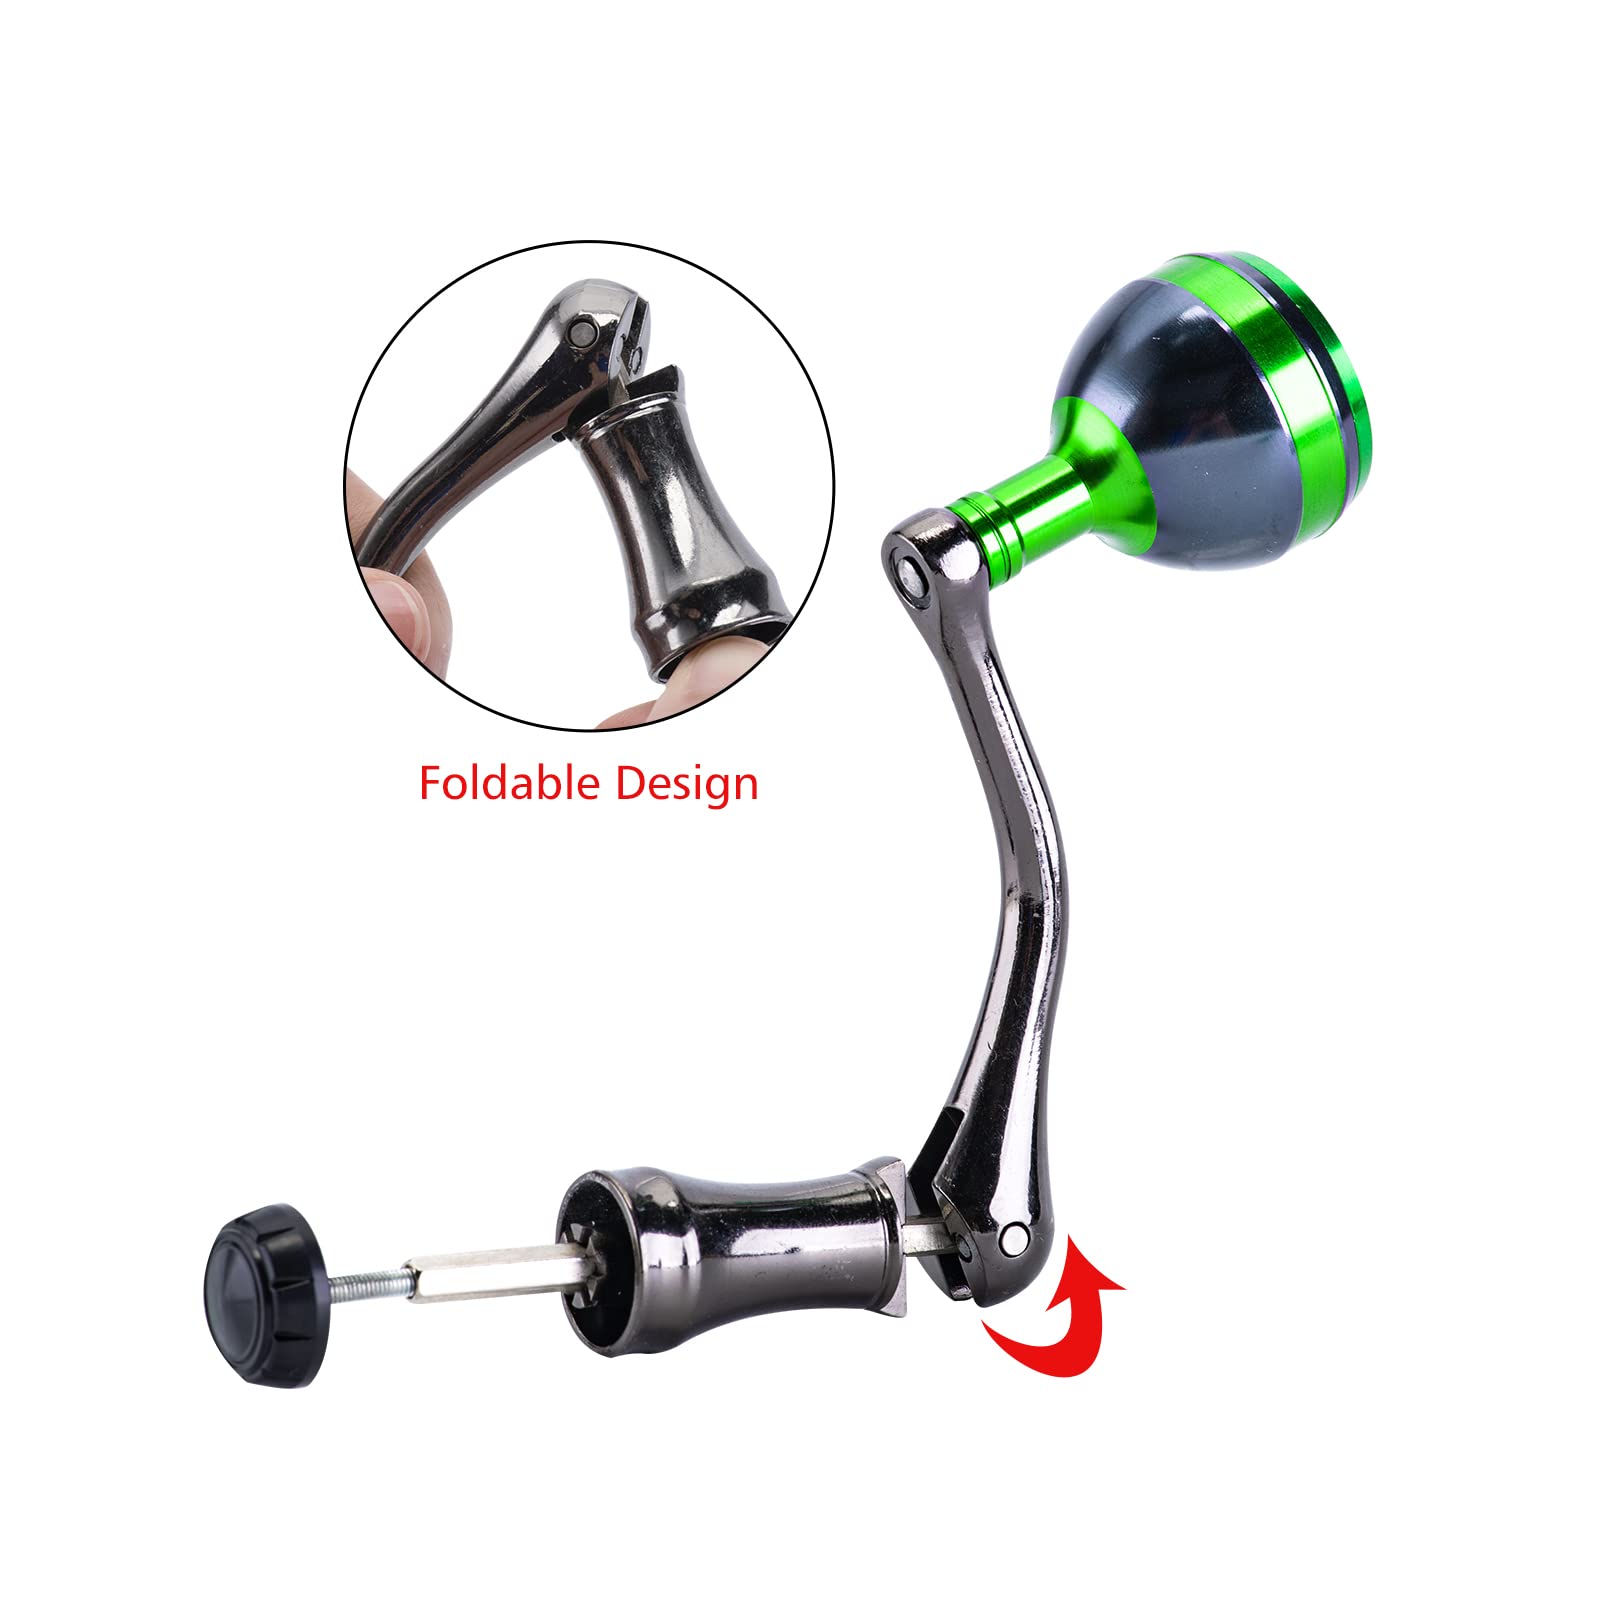 * Metal Spinning Reel Handle with Round Power Knob - 3 Sizes (S/M/L) for  Comfortable Fishing Experience